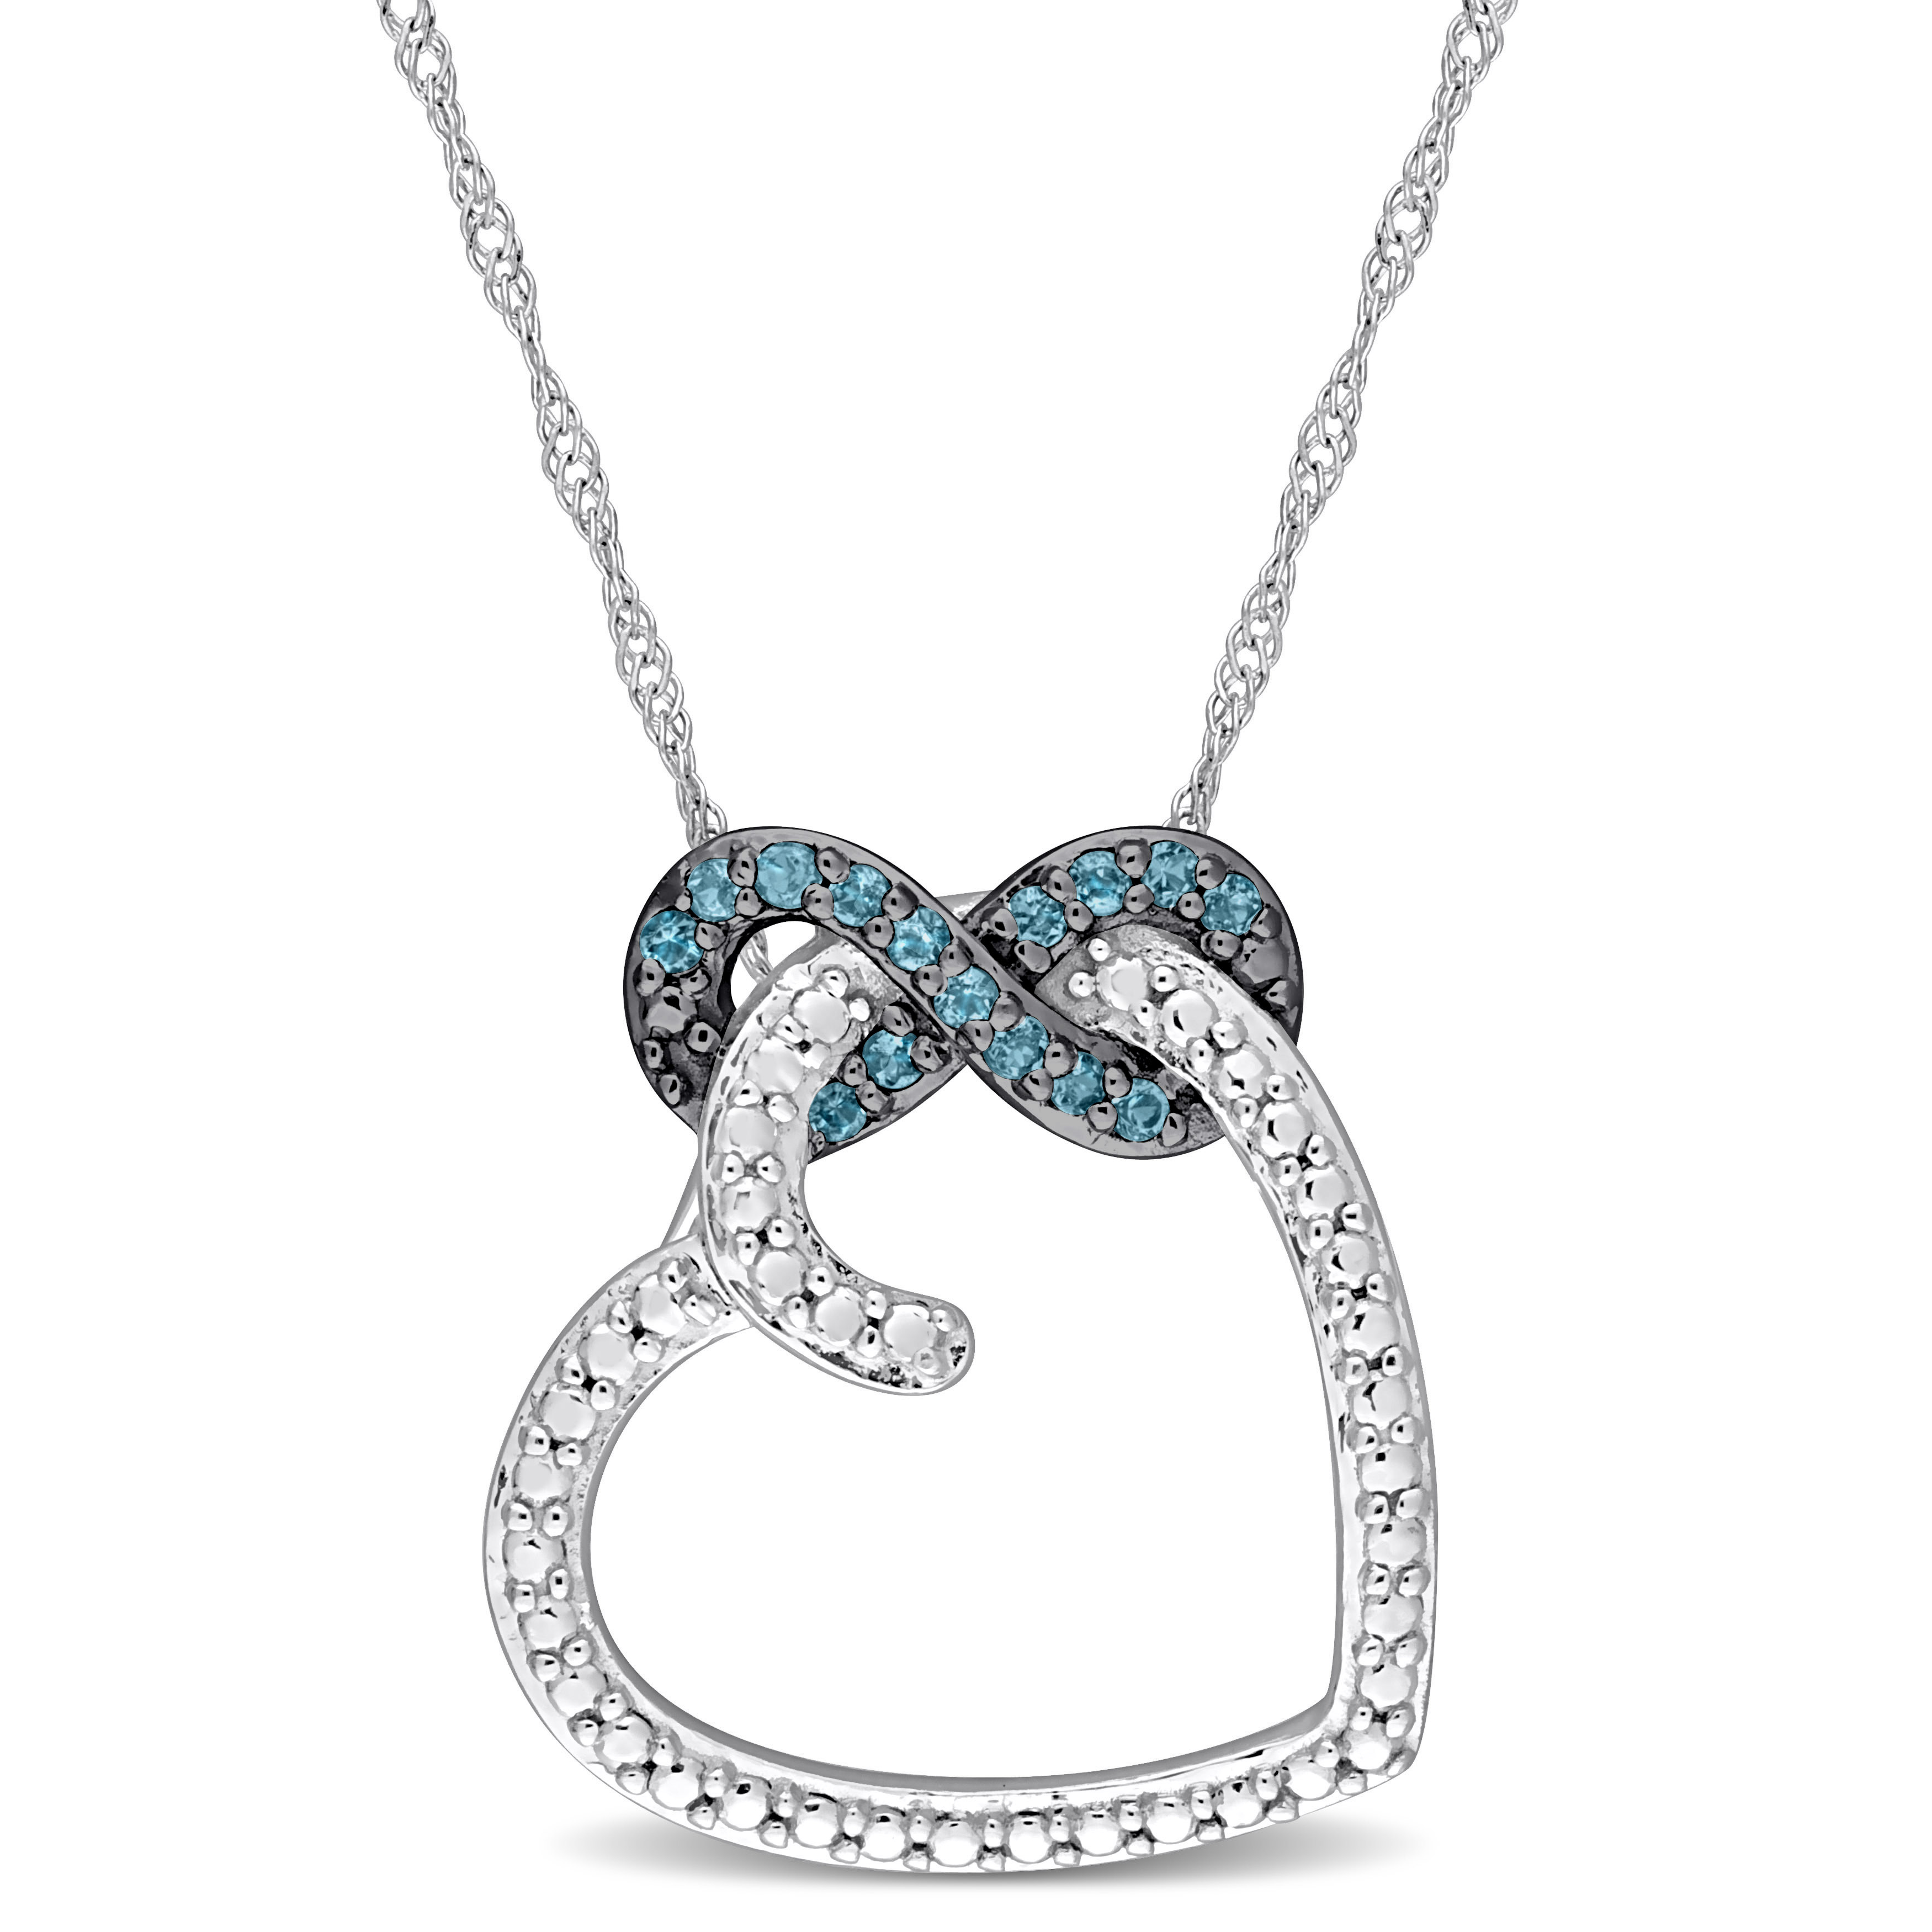 1/6 CT TGW London Blue Topaz Heart Infinity Pendant with Chain in 10k White Gold - 17 in.